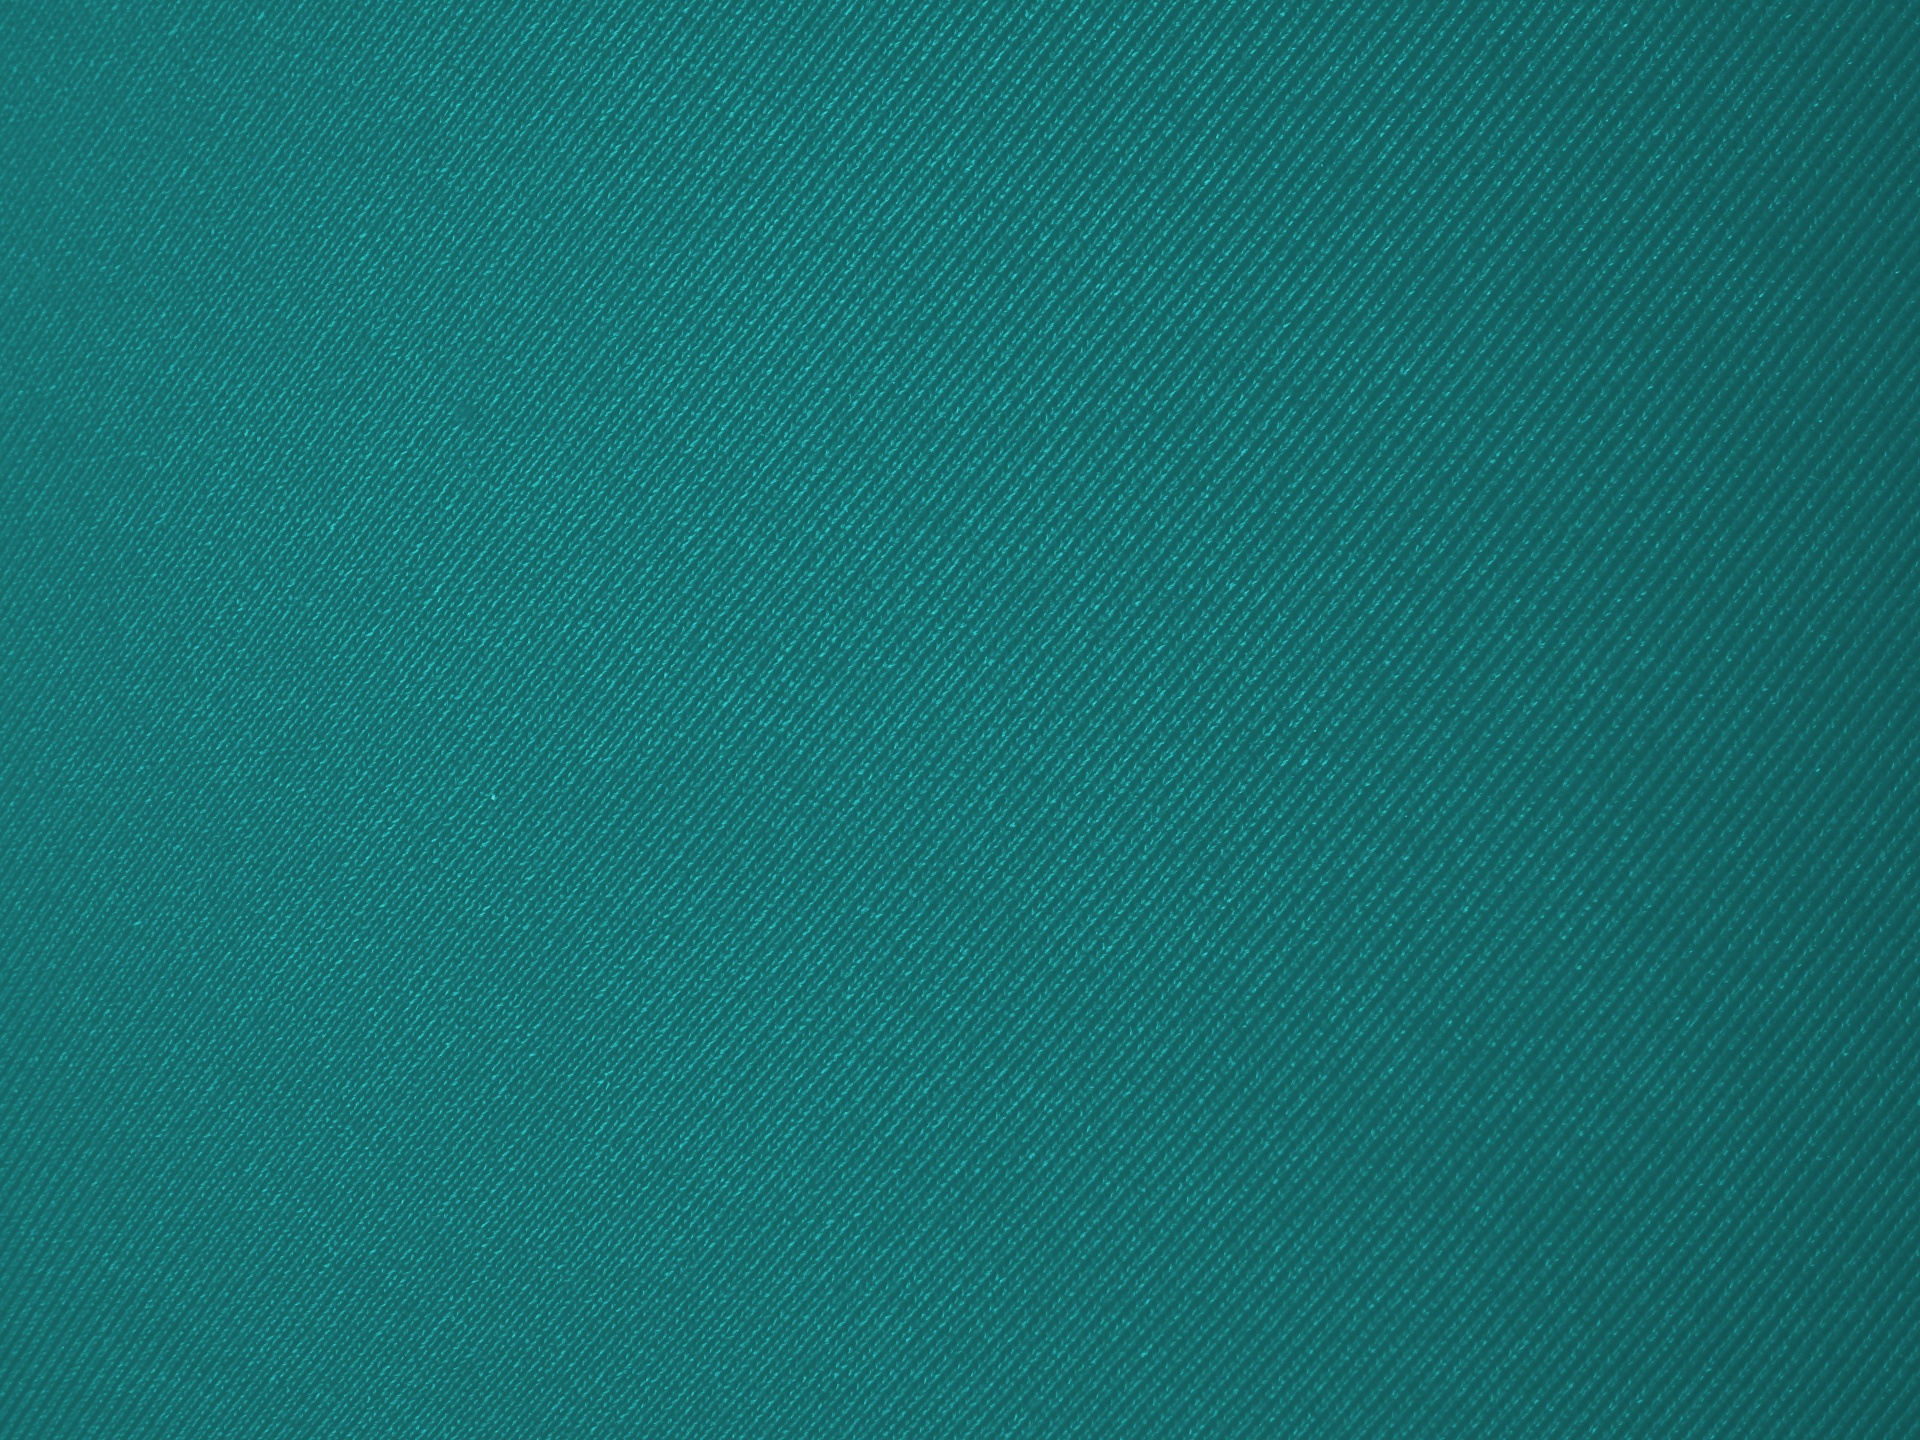 Turquoise Green Blue Backgrounds Material Free Image From Needpix Com